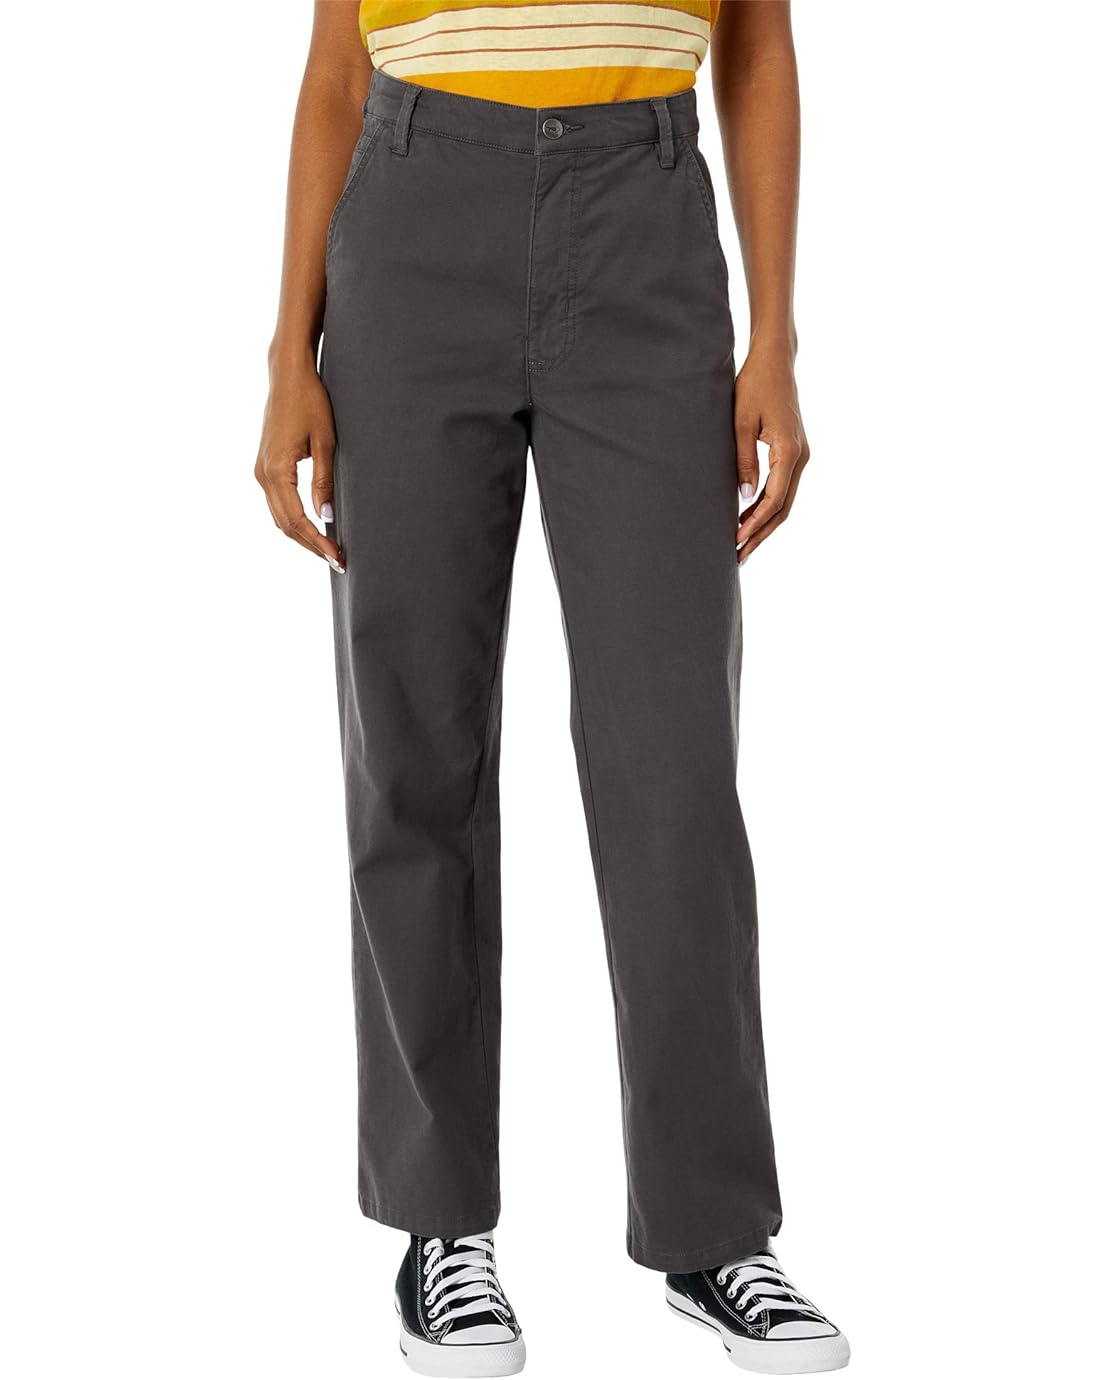 Toad&Co Earthworks High-Rise Pants